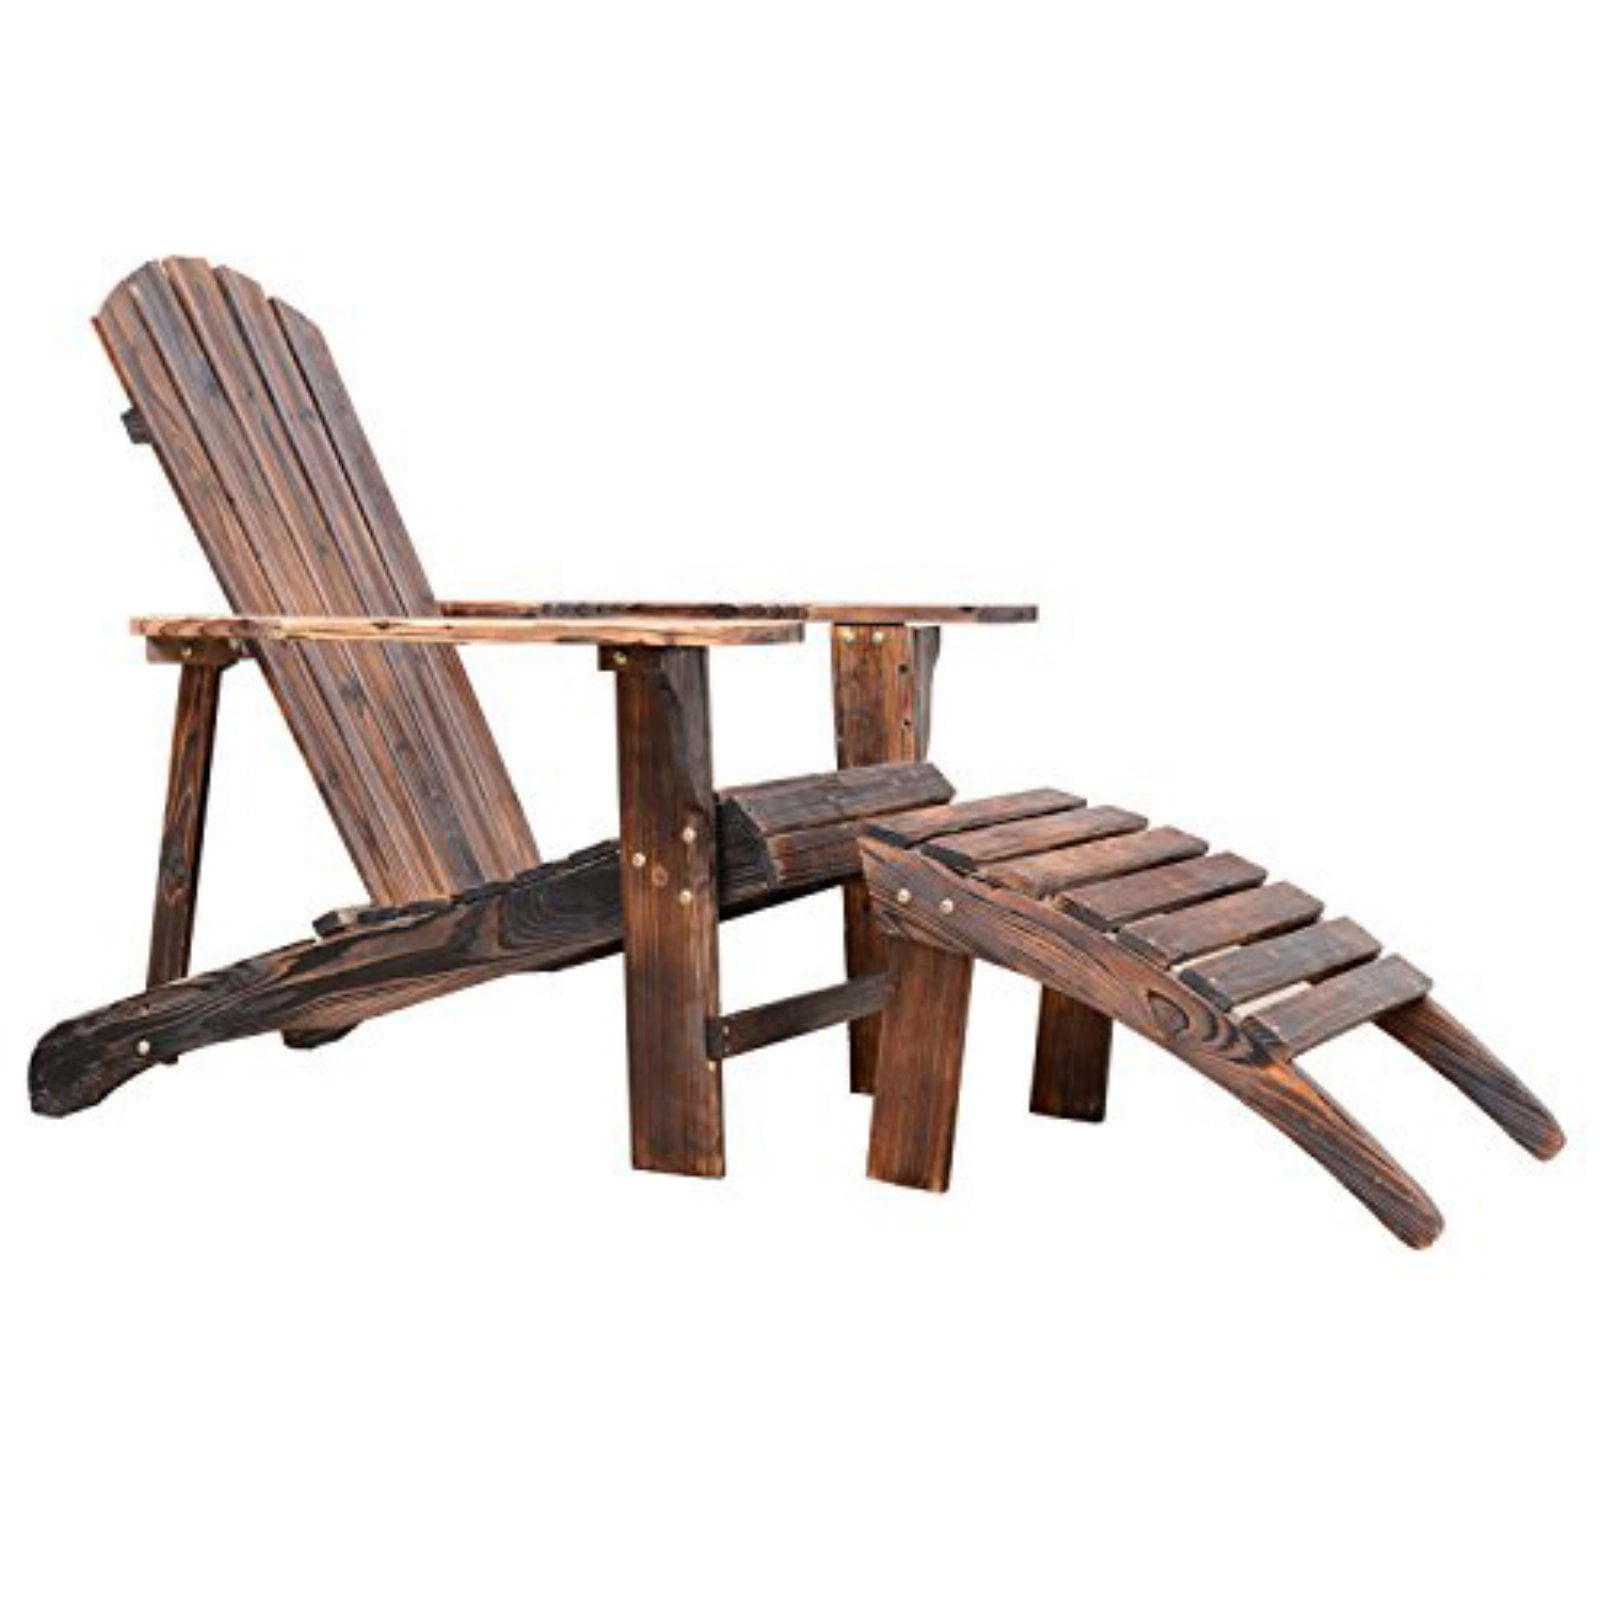 Outsunny Outdoor Patio Lounge Wooden Adirondack Chair with